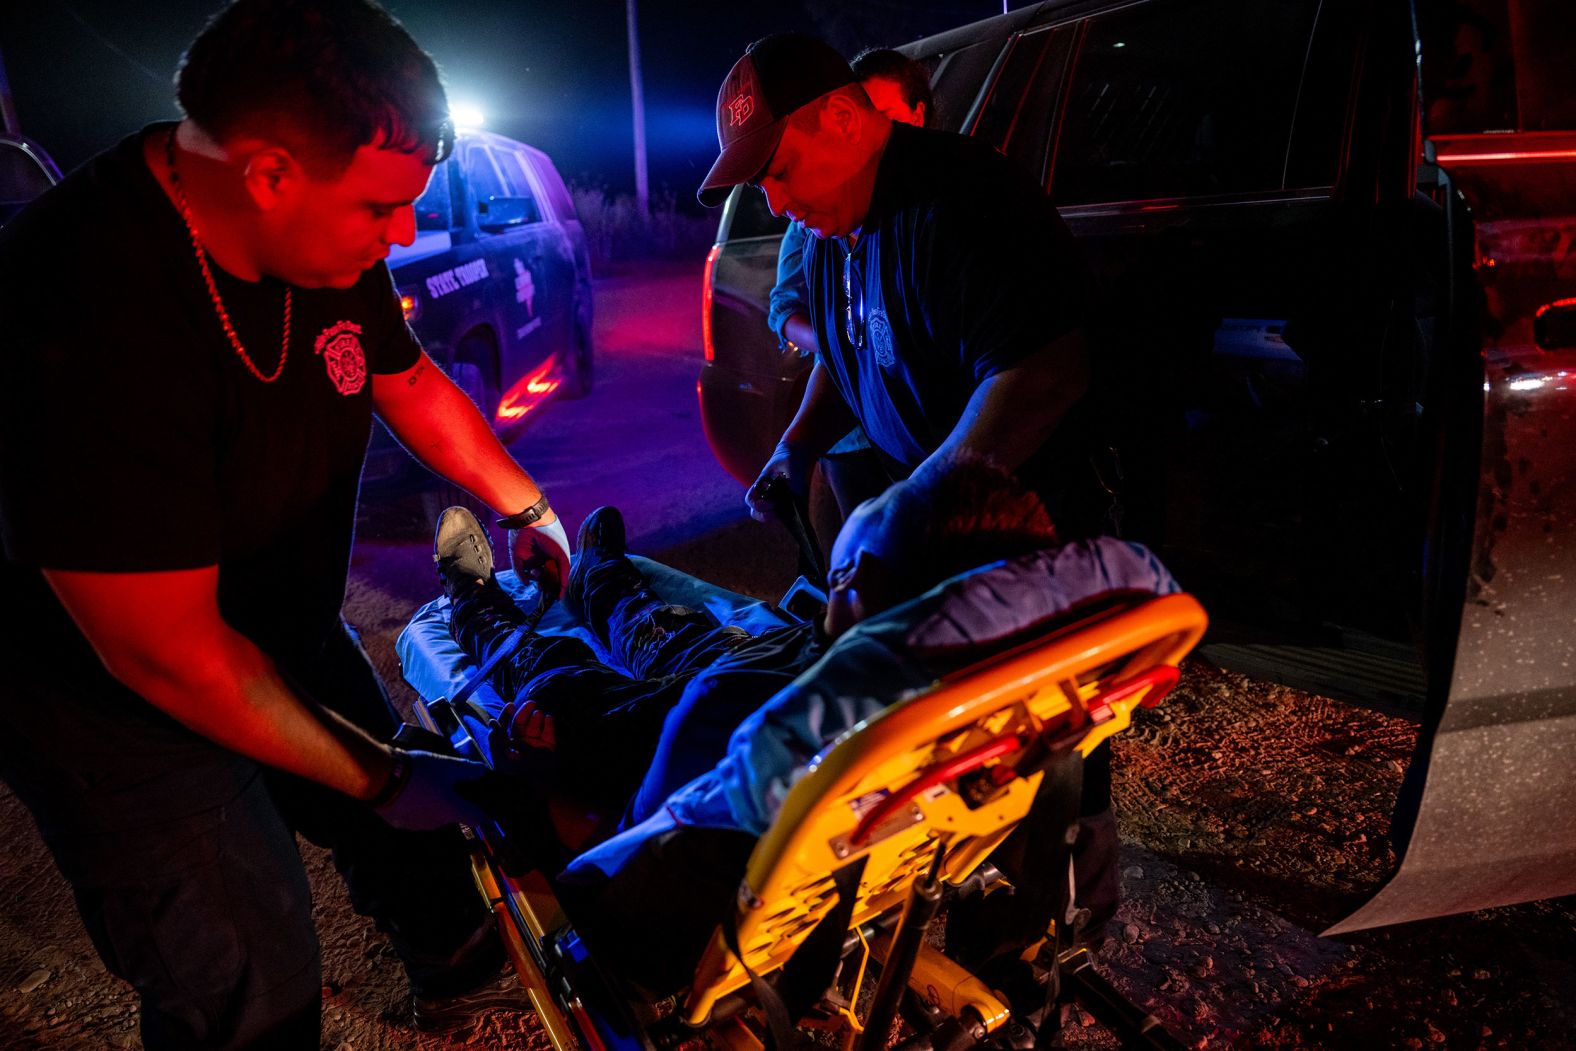 Israel Sanchez, left, and Alfonso Garcia carry a person onto a stretcher in Eagle Pass, Texas, on July 18. The person, who was suffering from dehydration, fell sick after he and his mother were found with a group of migrants who recently crossed the Rio Grande into the United States.